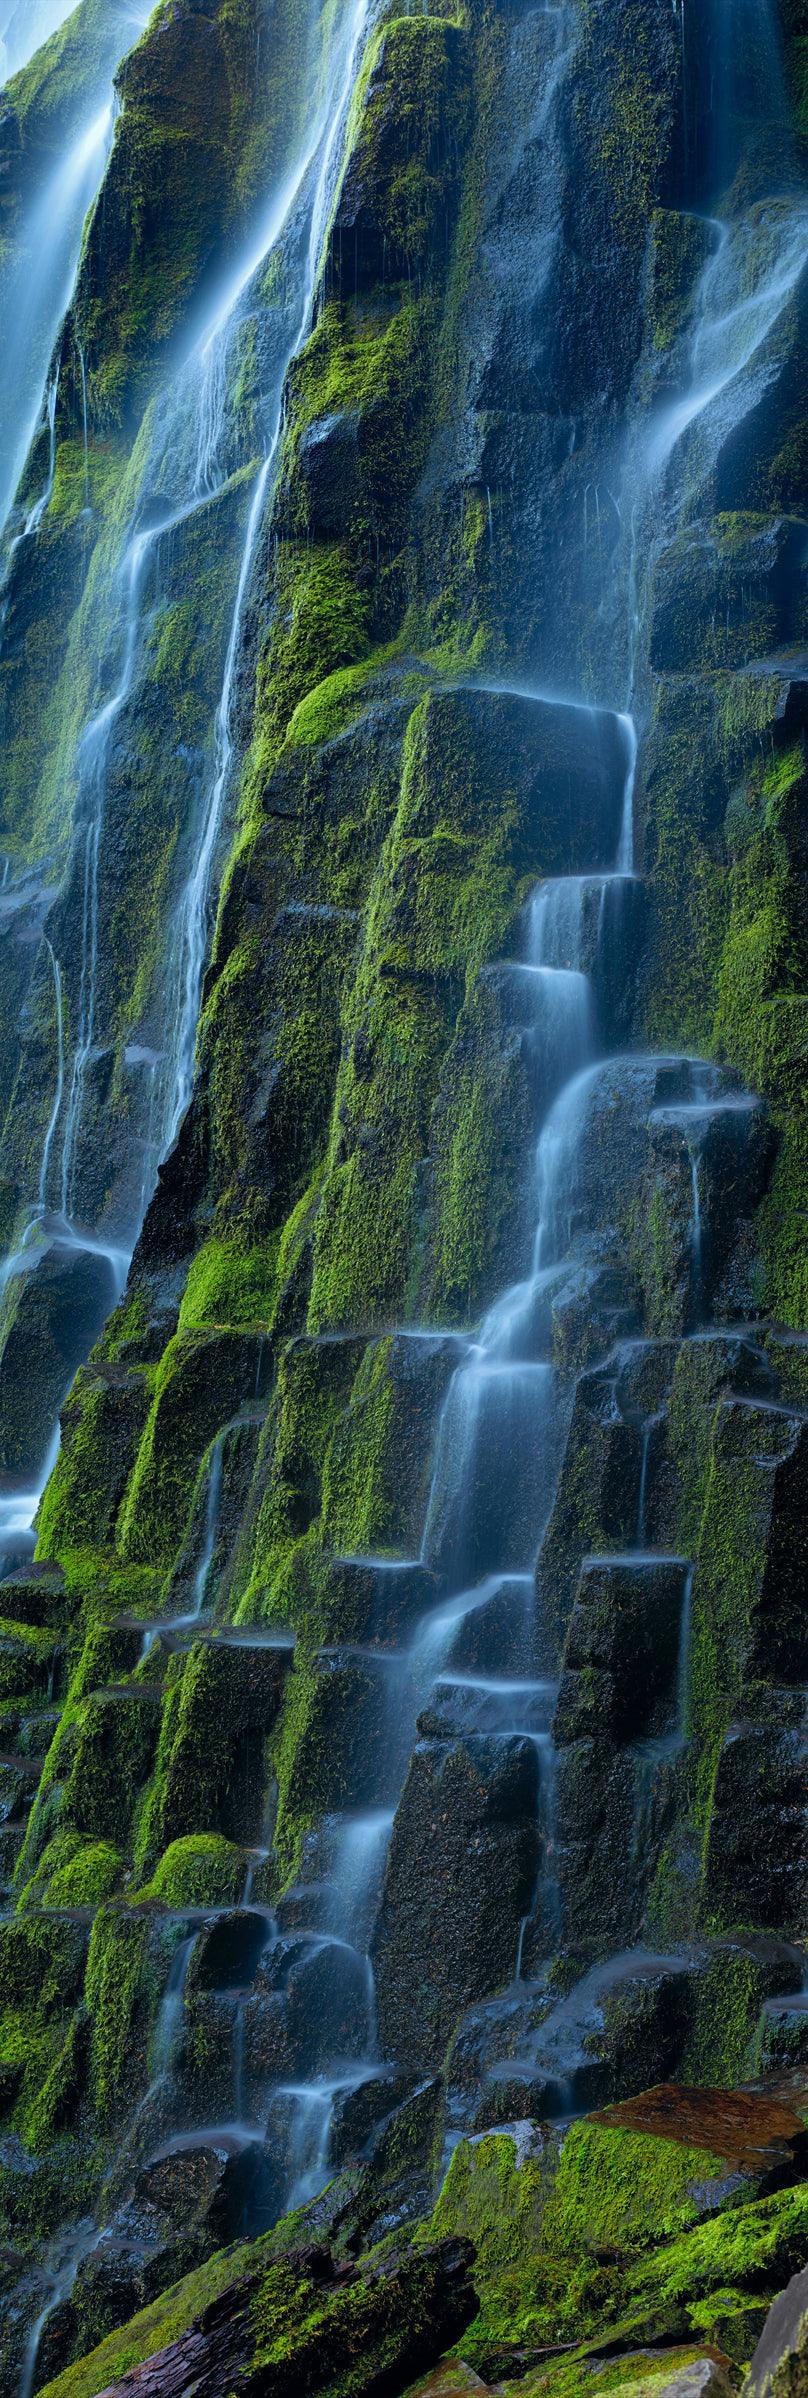 Water pouring down a moss covered black rock wall at Proxy Falls Oregon